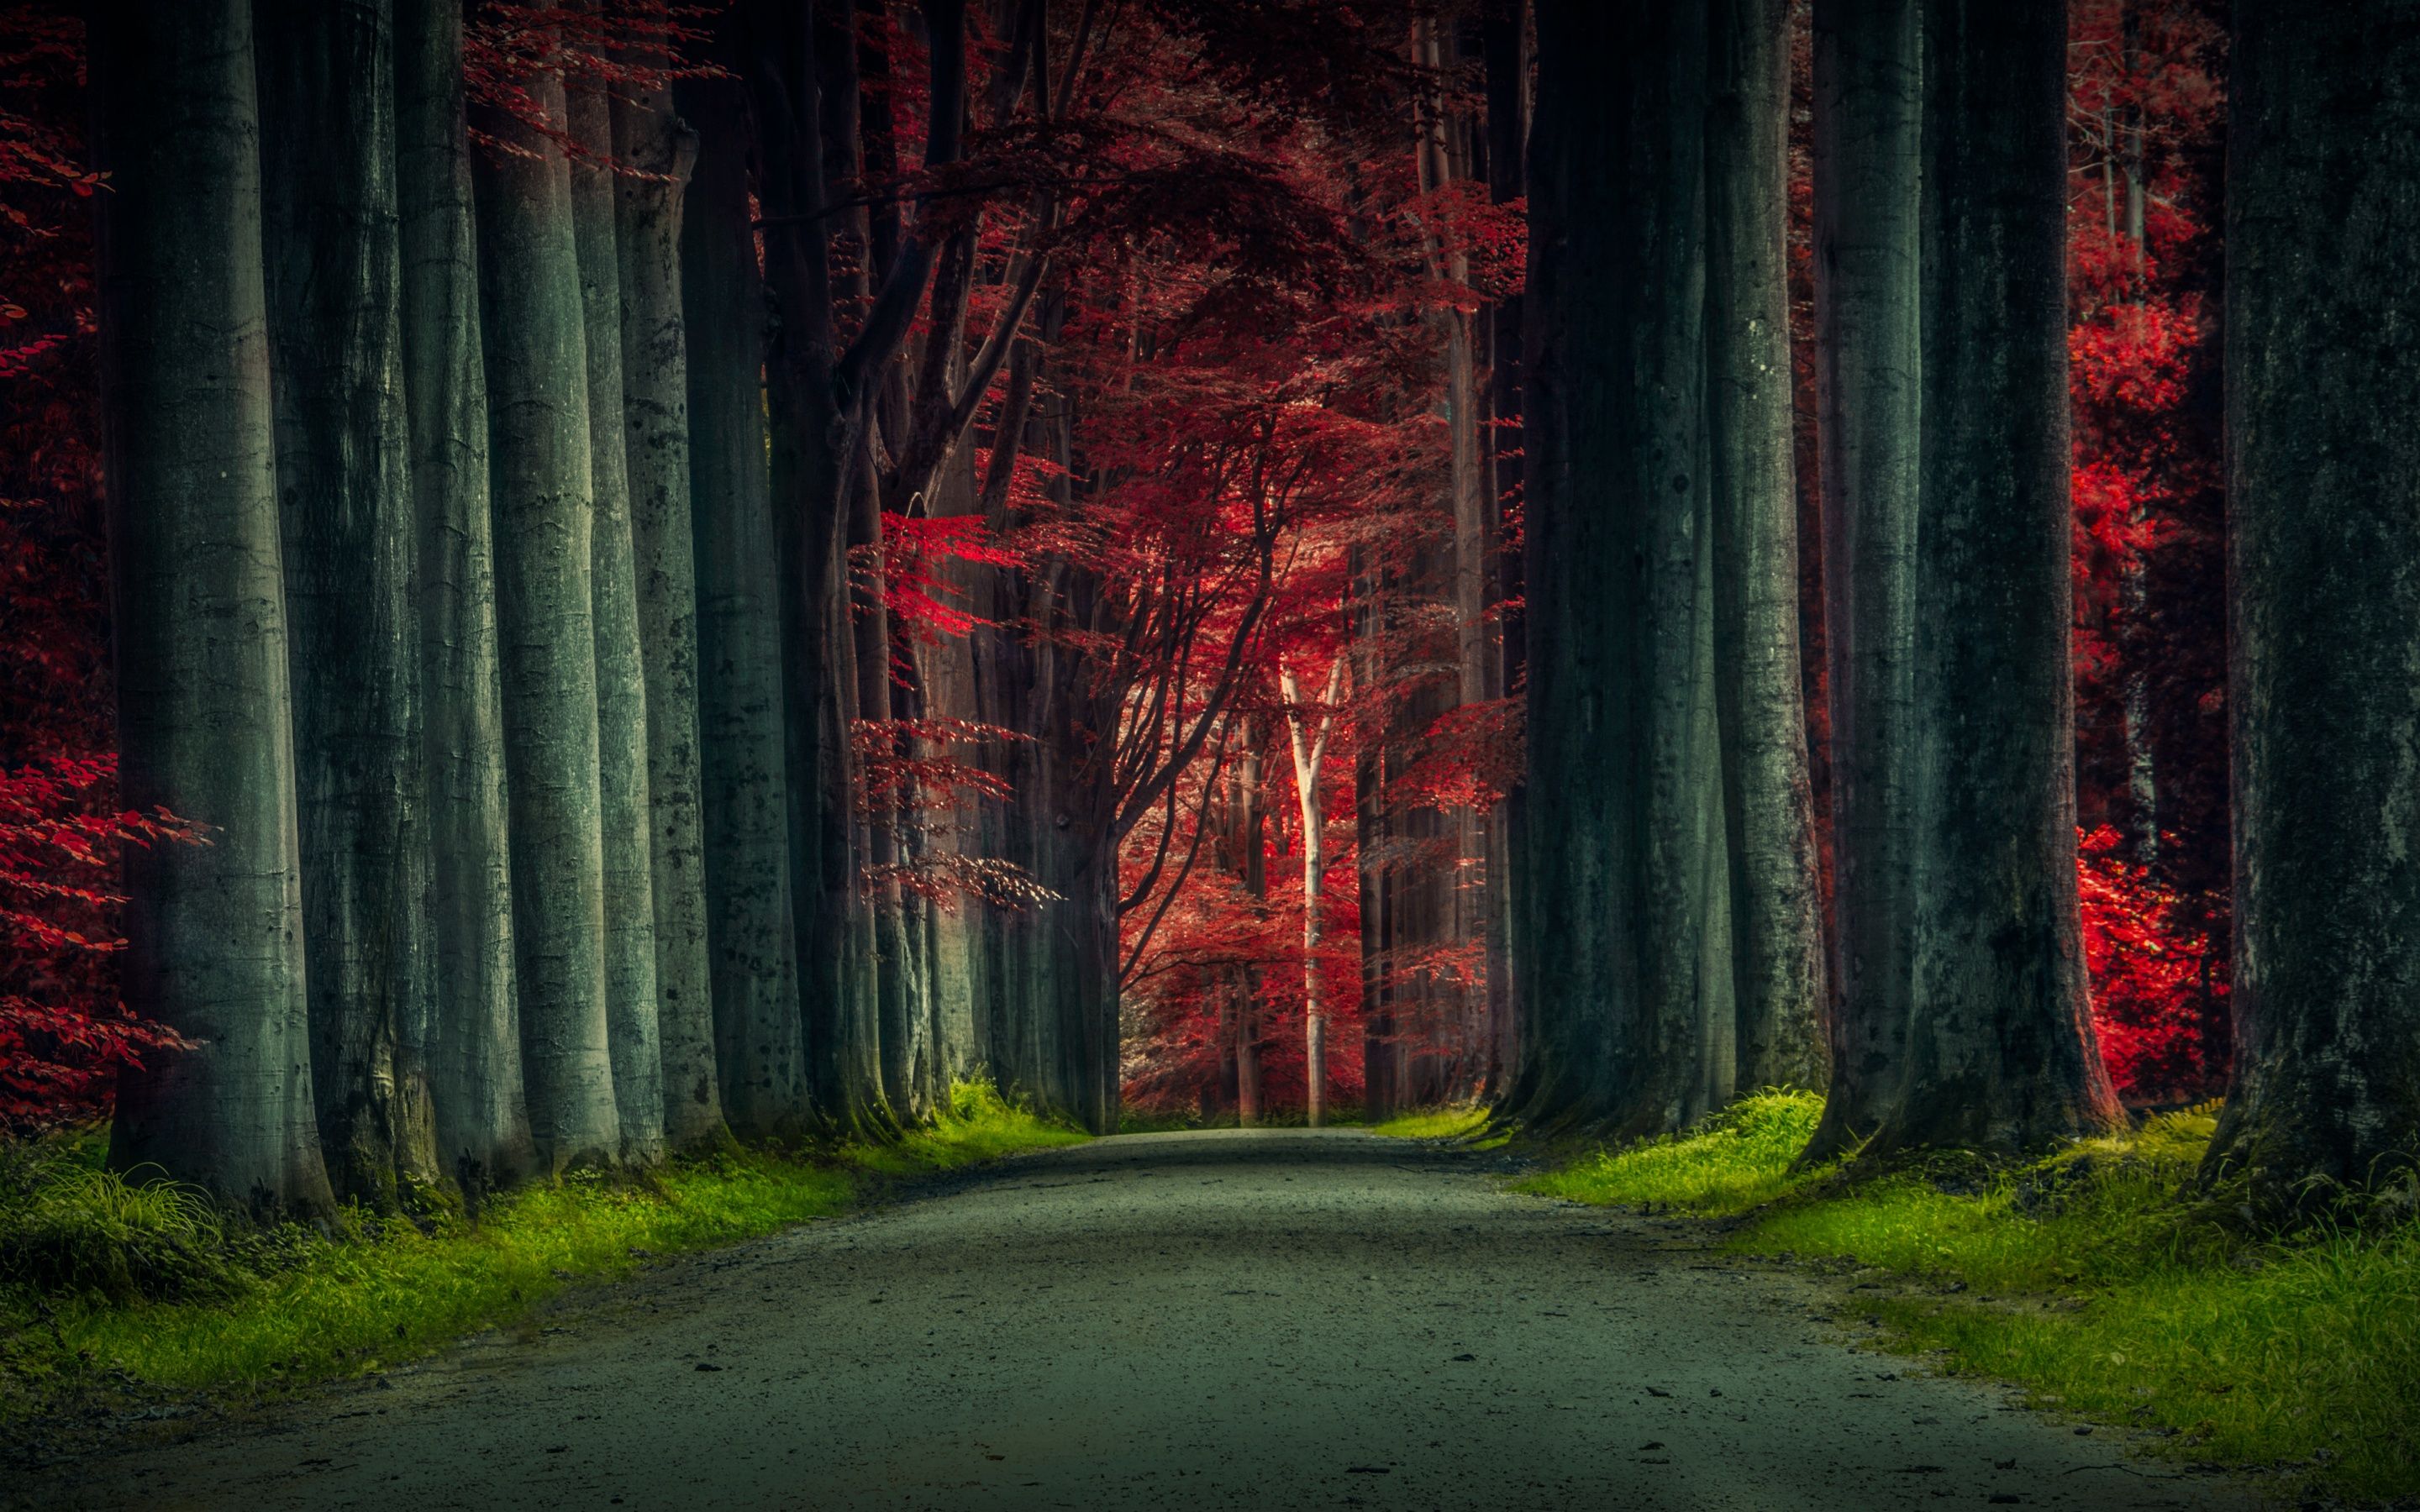 Forest Road 4K Wallpaper, Trees, Woods, Sunset, Autumn Forest, Dawn, Pathway, Scenic, 5K, Nature